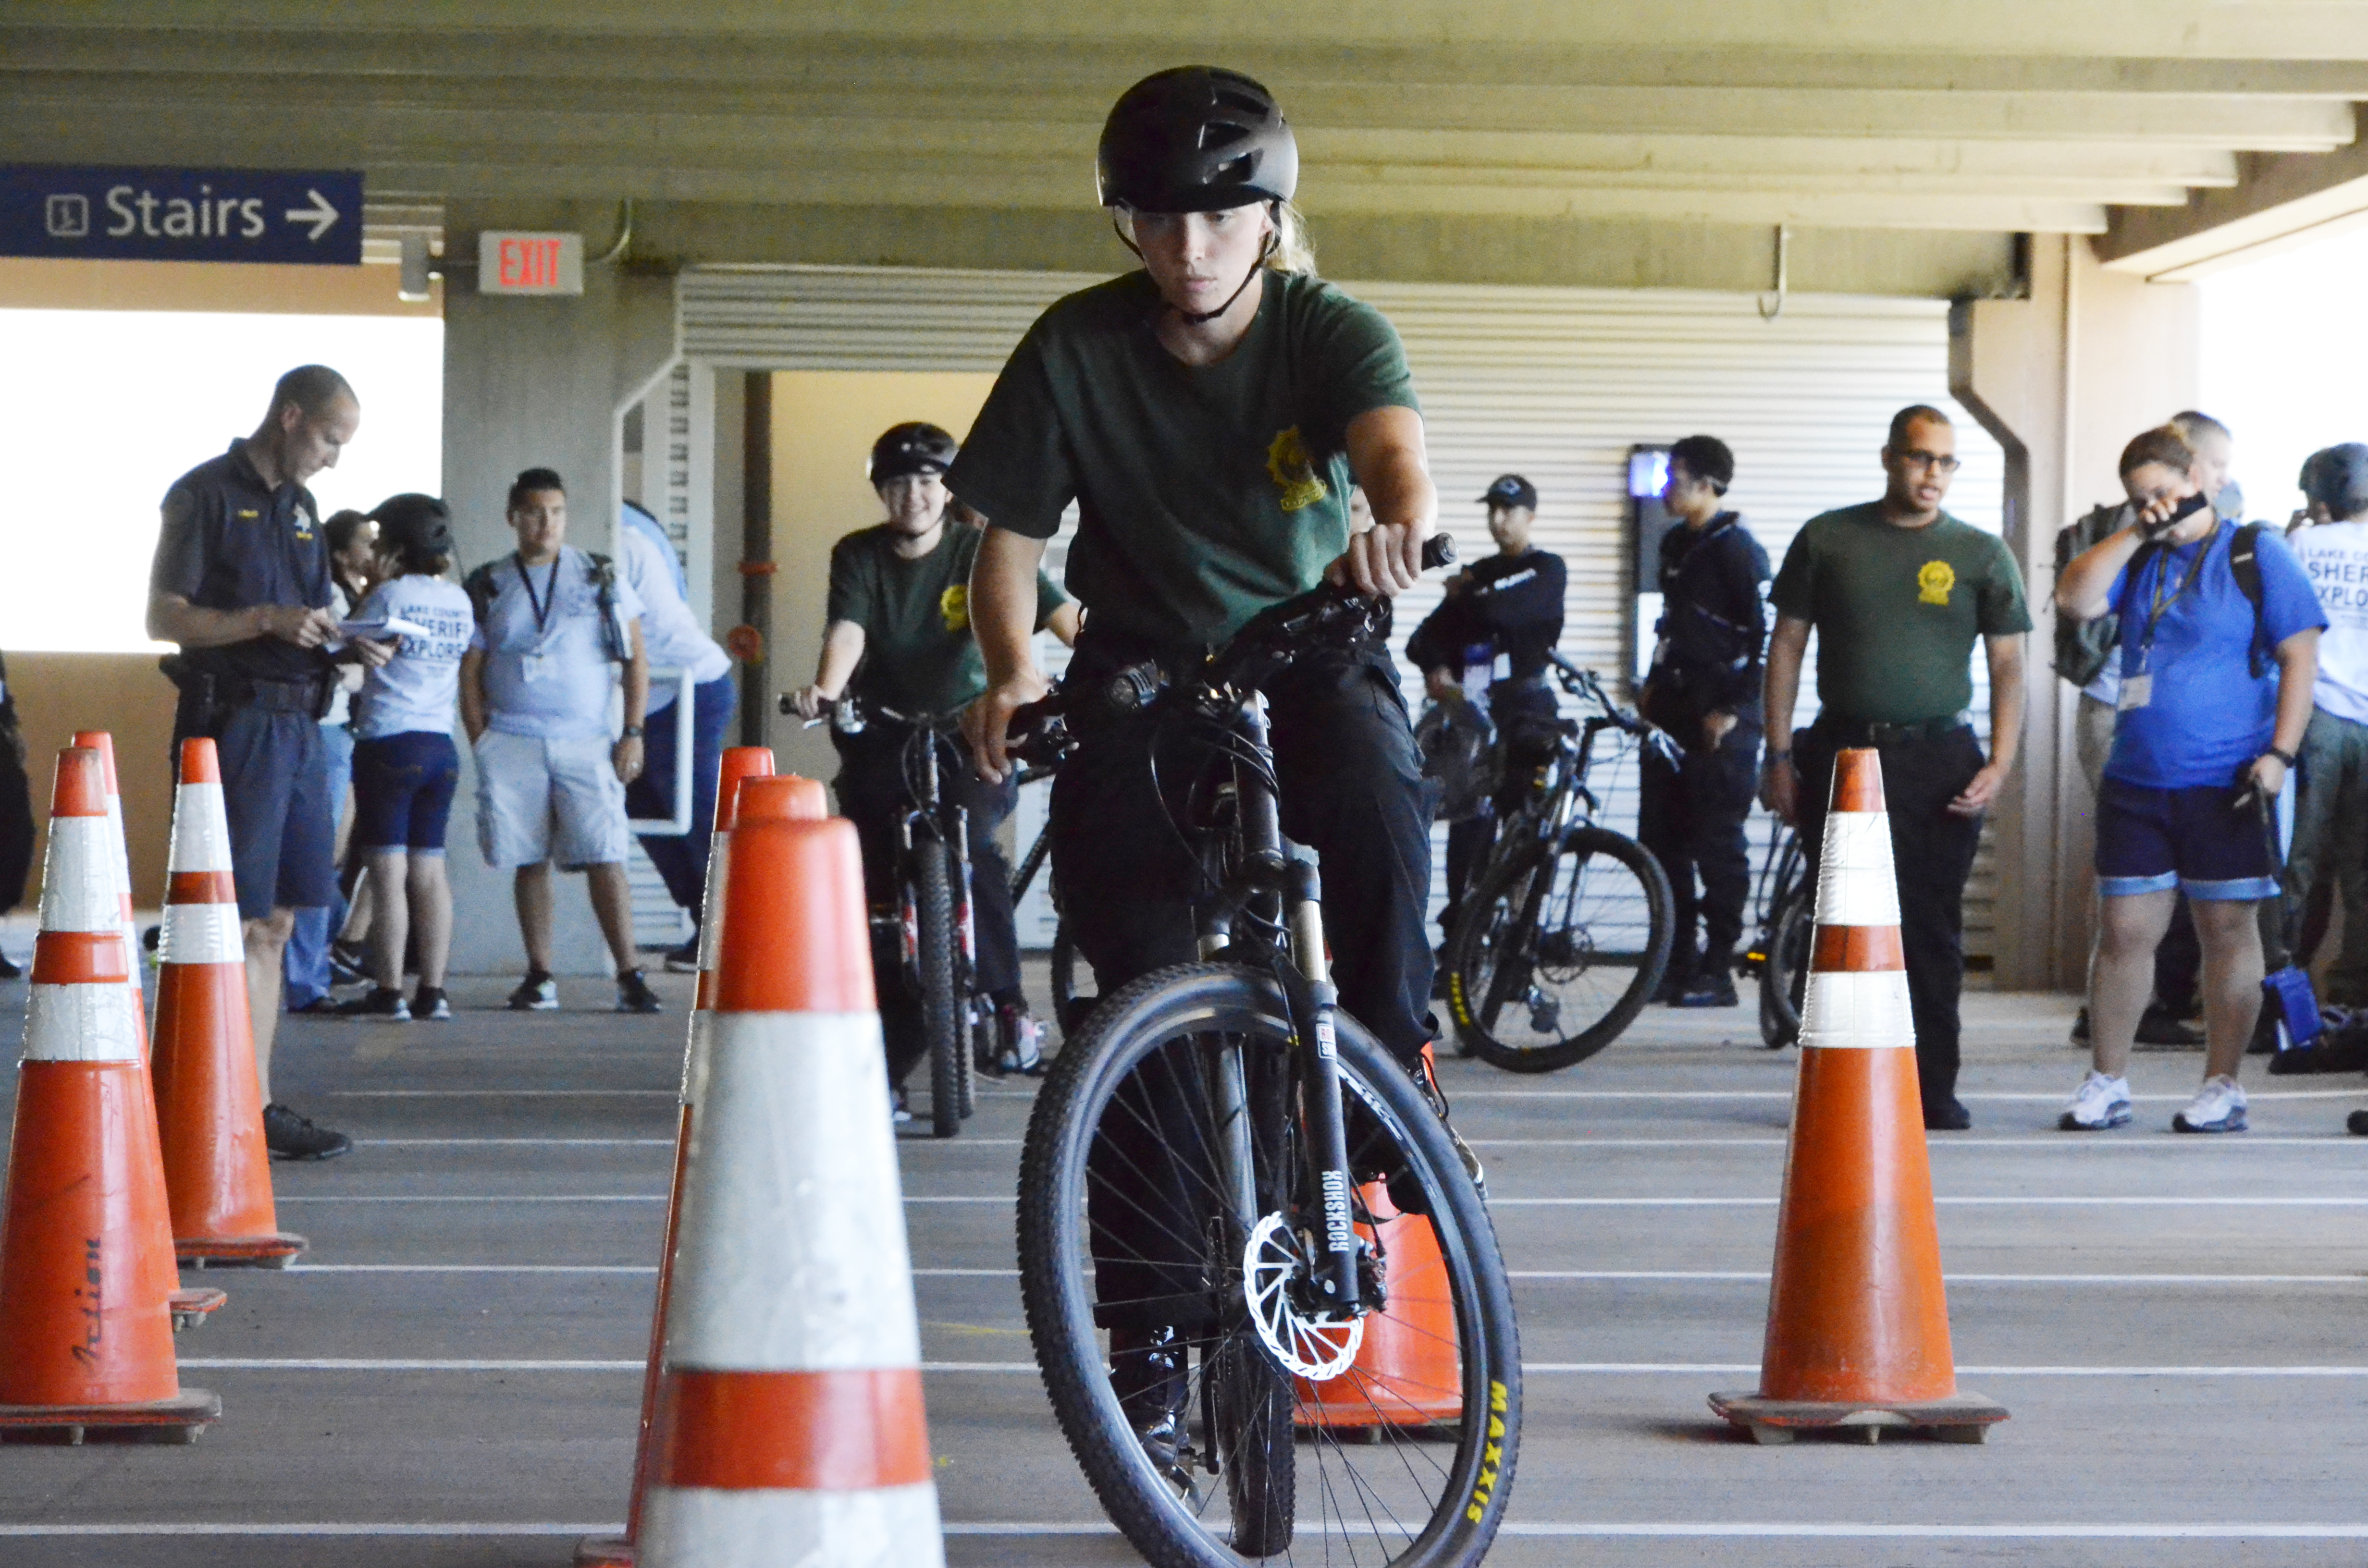 Police biking required agility and coordination